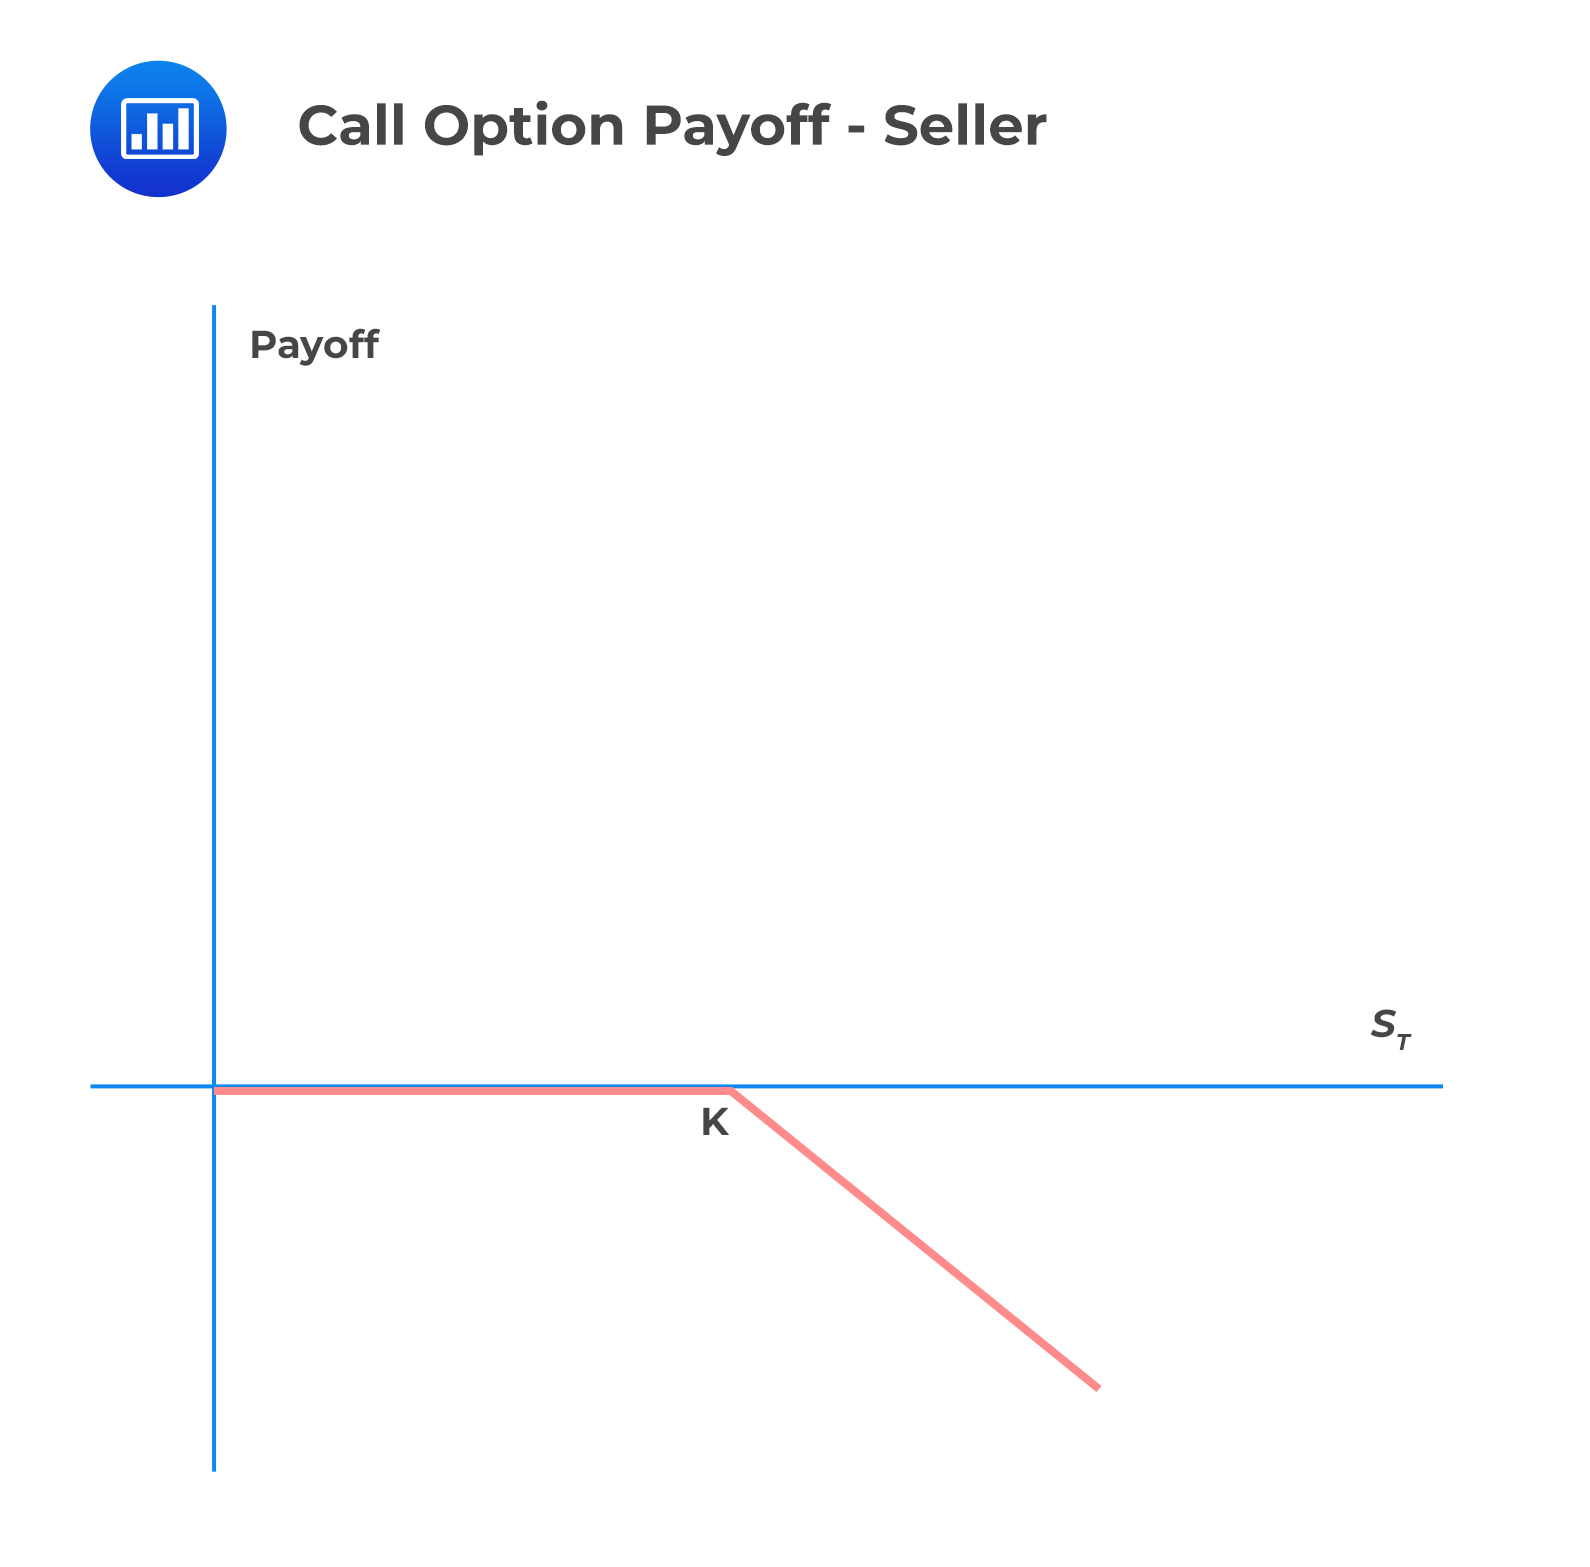 Call Option Payoff - Seller